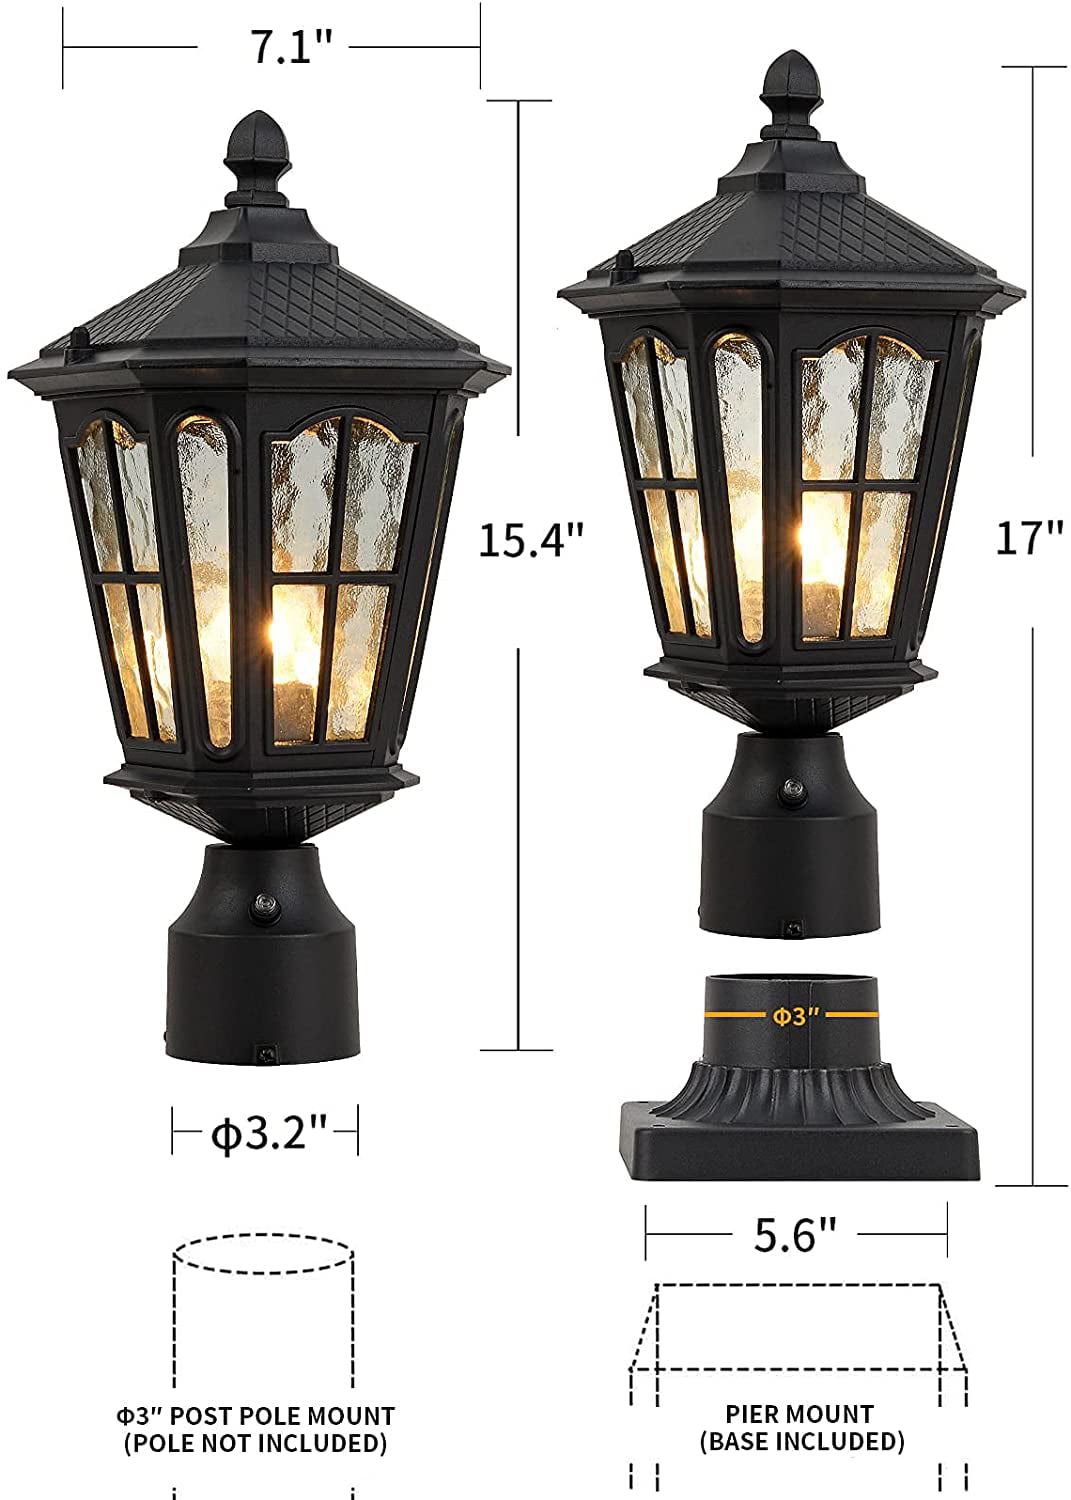 Kamileo Dusk to Dawn Post Light Outdoor with 3-Inch Pier Mount Base, 17''H Exterior  Post Light Fixture,Waterproof IP65 Classic Die Cast Aluminum with Water  Ripple Glass, E26 Base 60W Max,Matte Black -